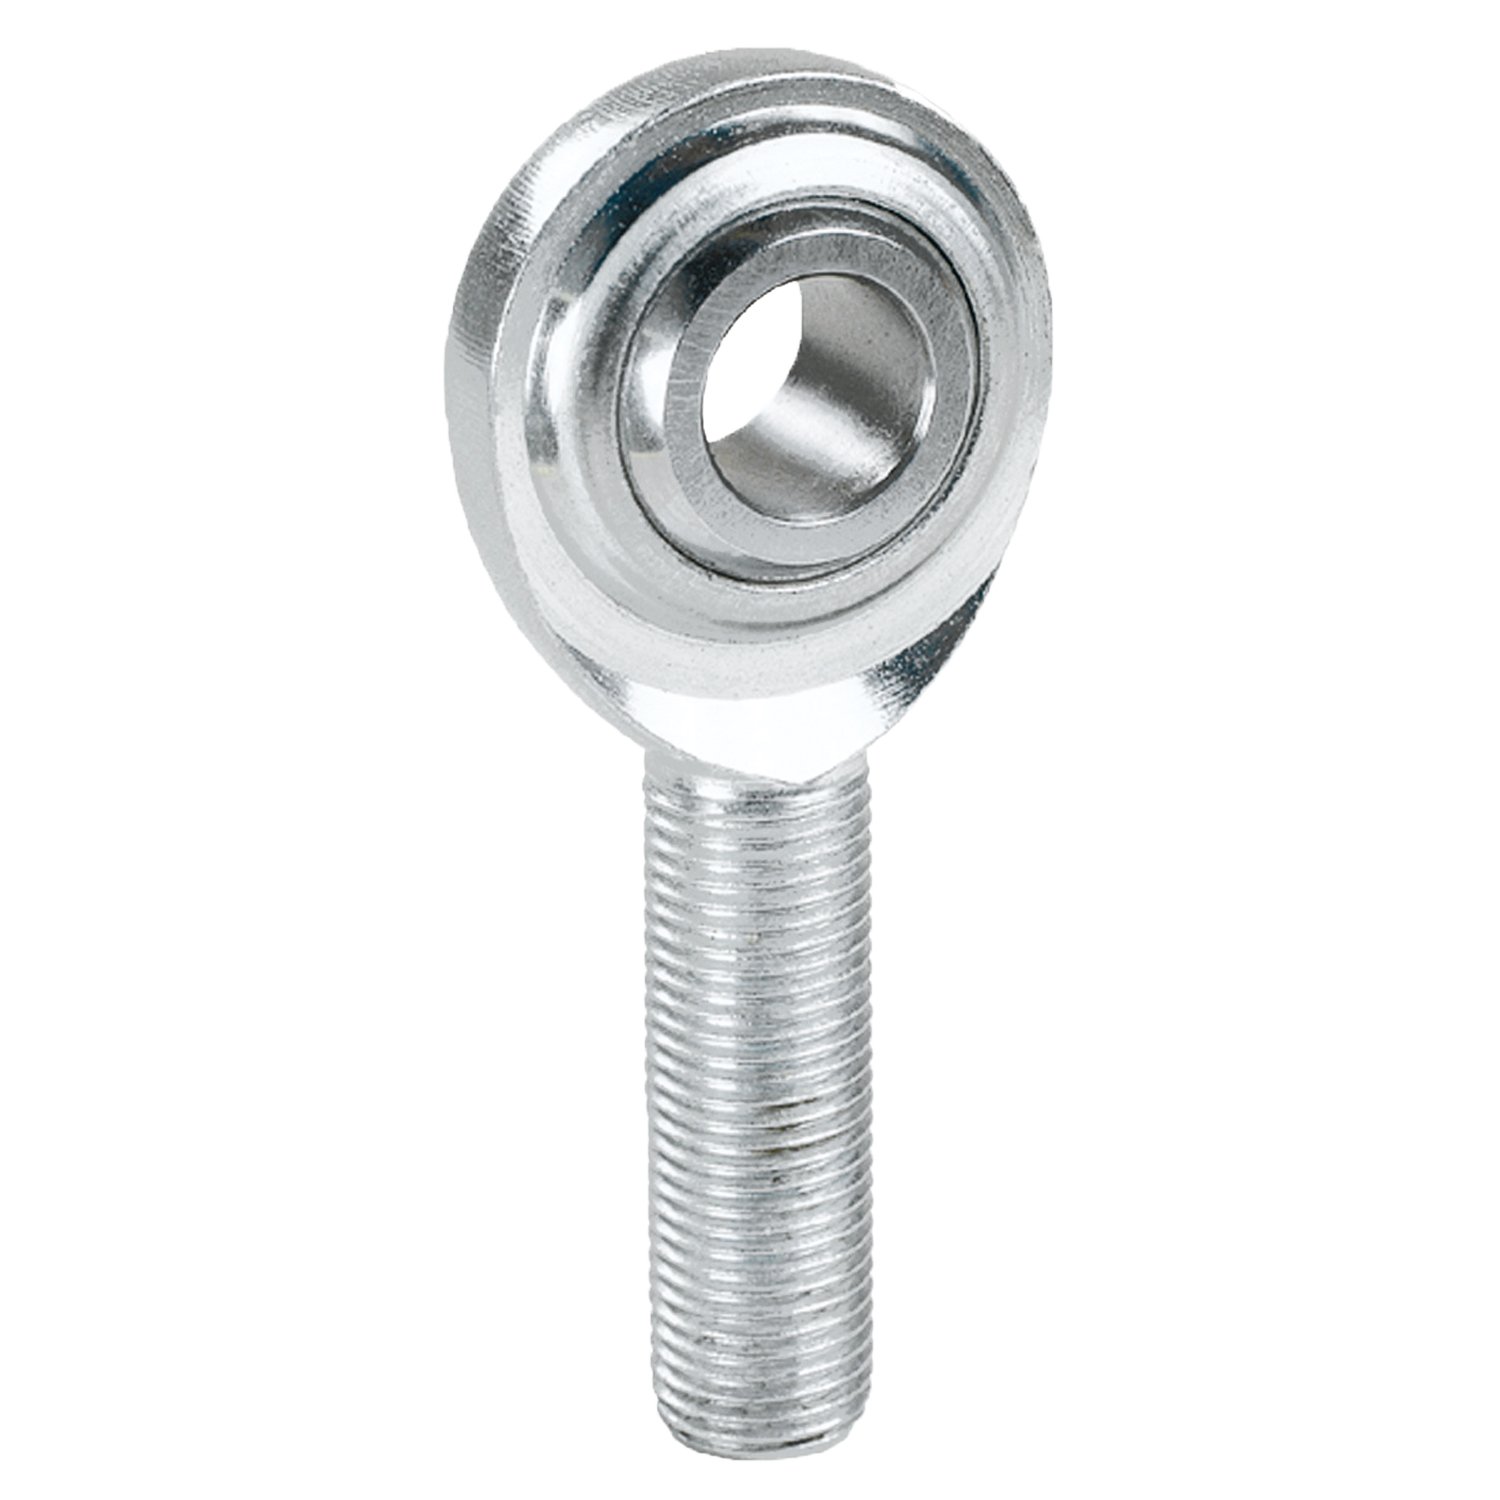 MGM-T Series Stainless Steel Rod End Hole I.D.: 10 mm